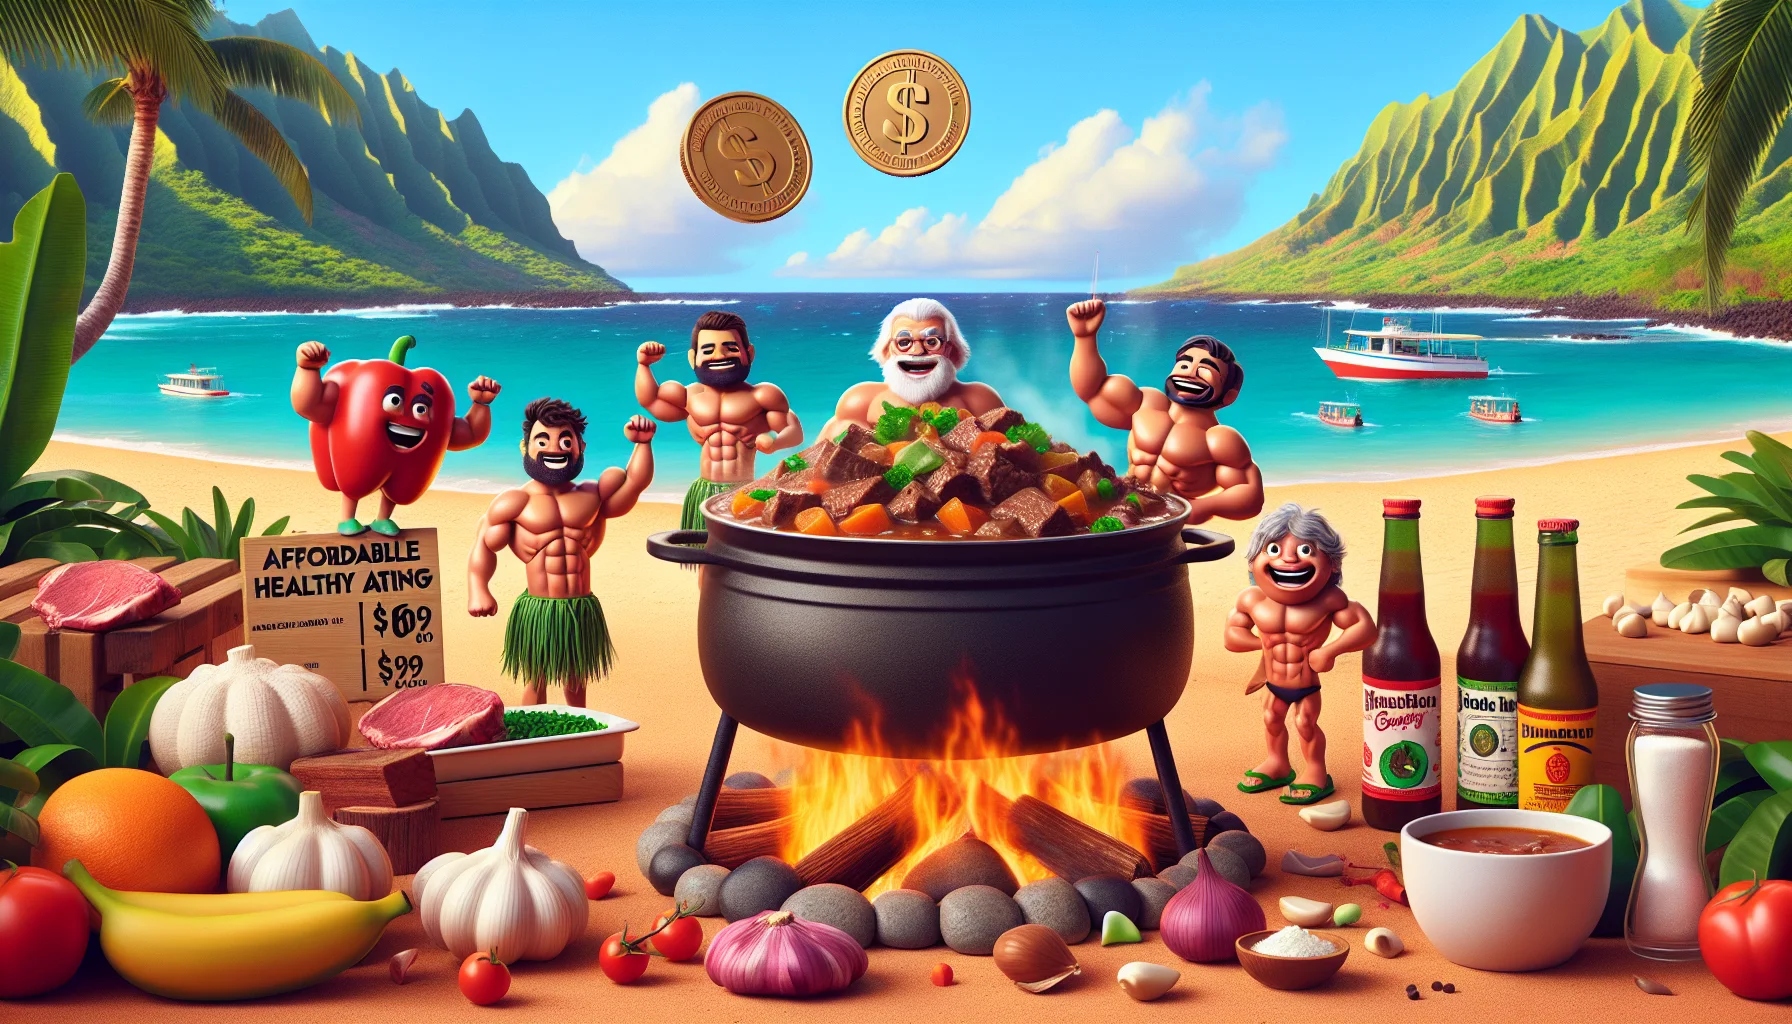 Generate a humorous and realistic image that depicts a scene of a Hawaiian beef stew recipe. Set in a fun and inviting setting, perhaps where the ingredients themselves are animated characters with expressive faces cheerfully promoting affordable healthy eating. The whole scene can be on a Hawaiian beach backdrop with the stew bubbling in a pot over an open fire, drawing in people with its vibrant colors and mouth-watering aroma. Include elements that illustrate the affordability of the meal, such as price tags hanging off each ingredient or coin graphic showing the total cost.